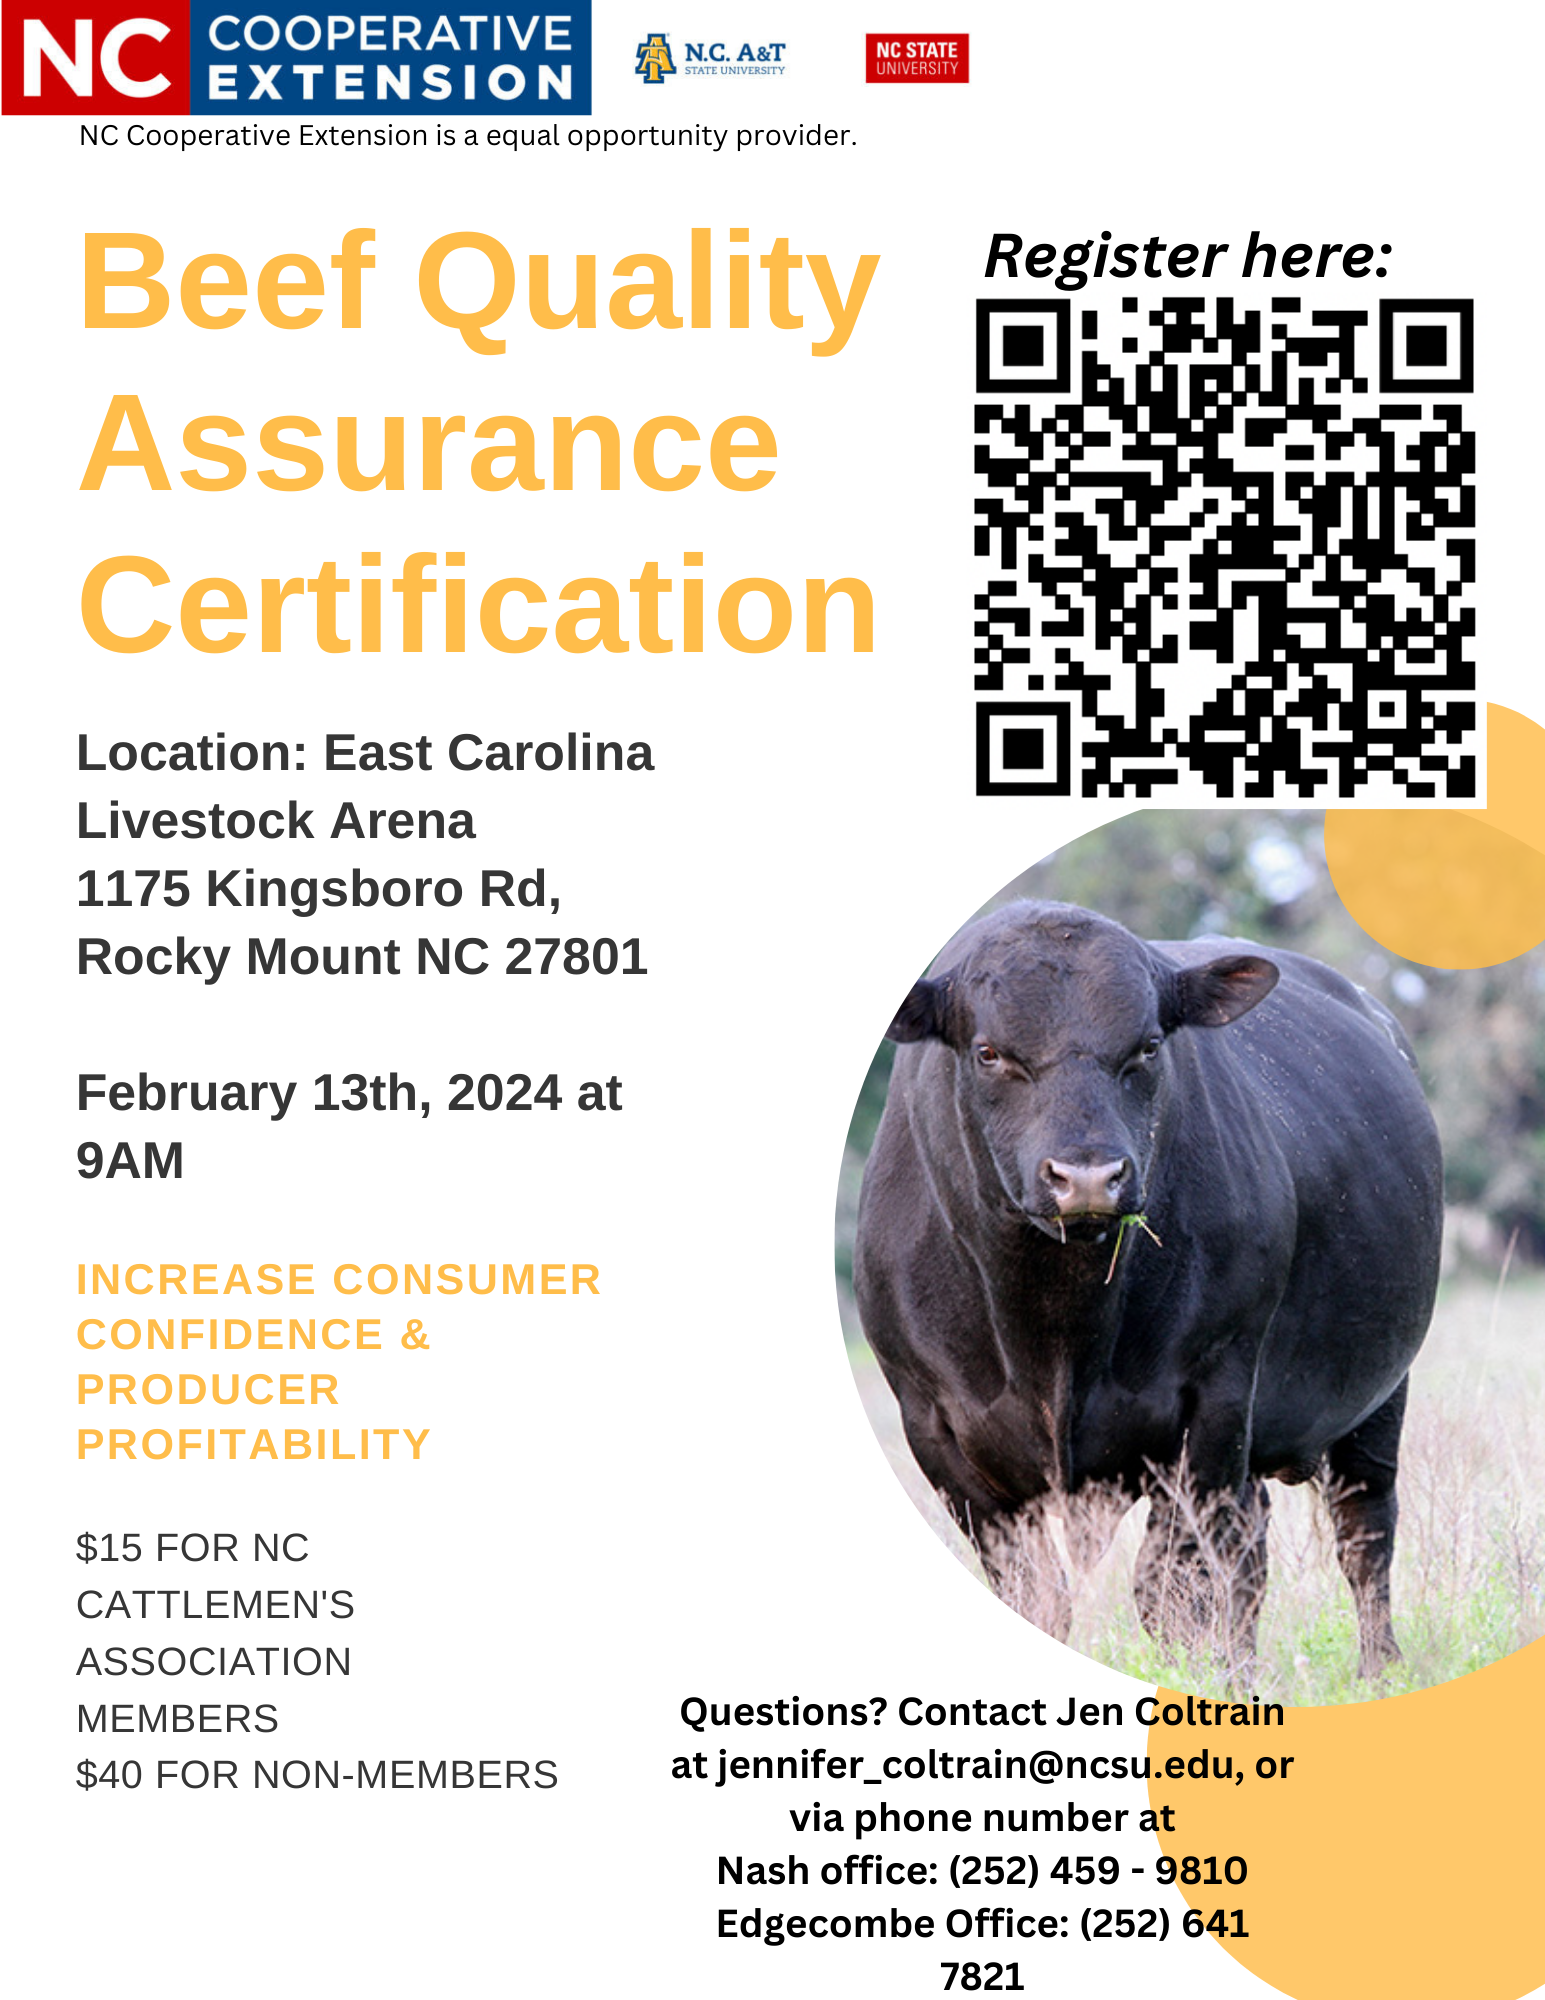 Beef Quality Assurance Certification